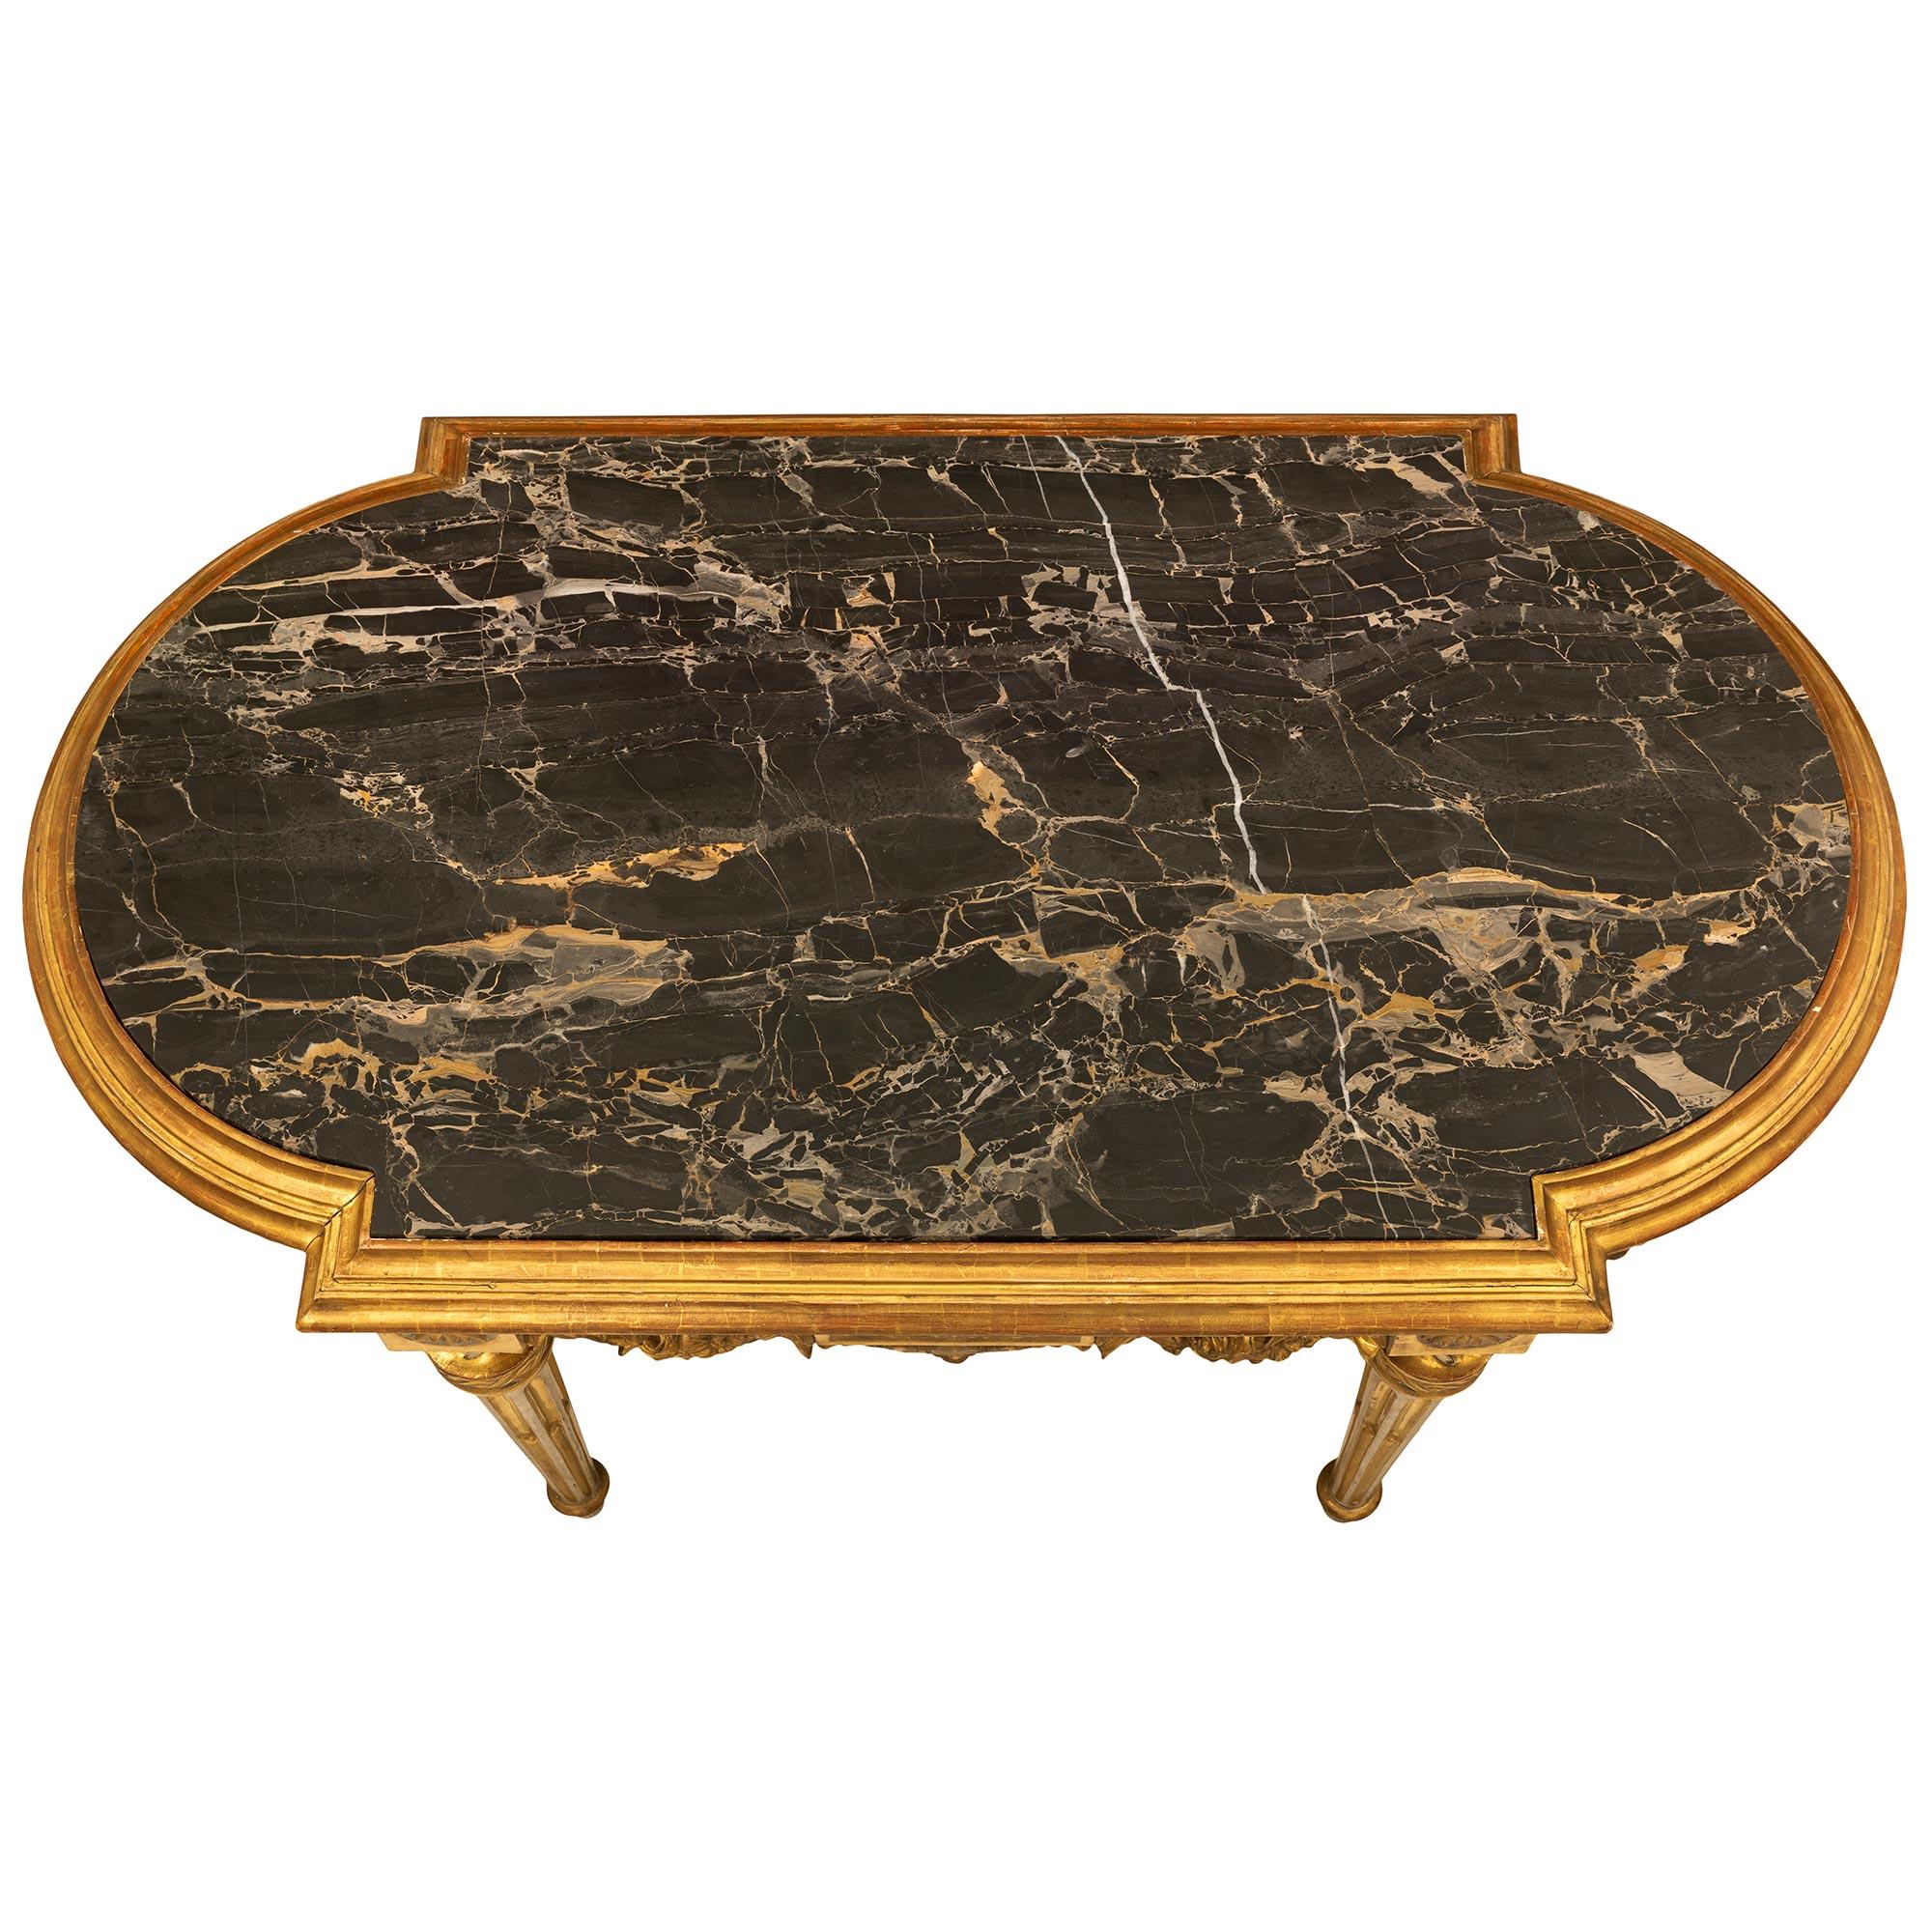 A stunning Italian mid 19th century Louis XVI st. patinated and giltwood center table. The table is raised on tapered reeded legs with a running wave design border below the rosette block top. Centered on each side of the frieze is a rectangular